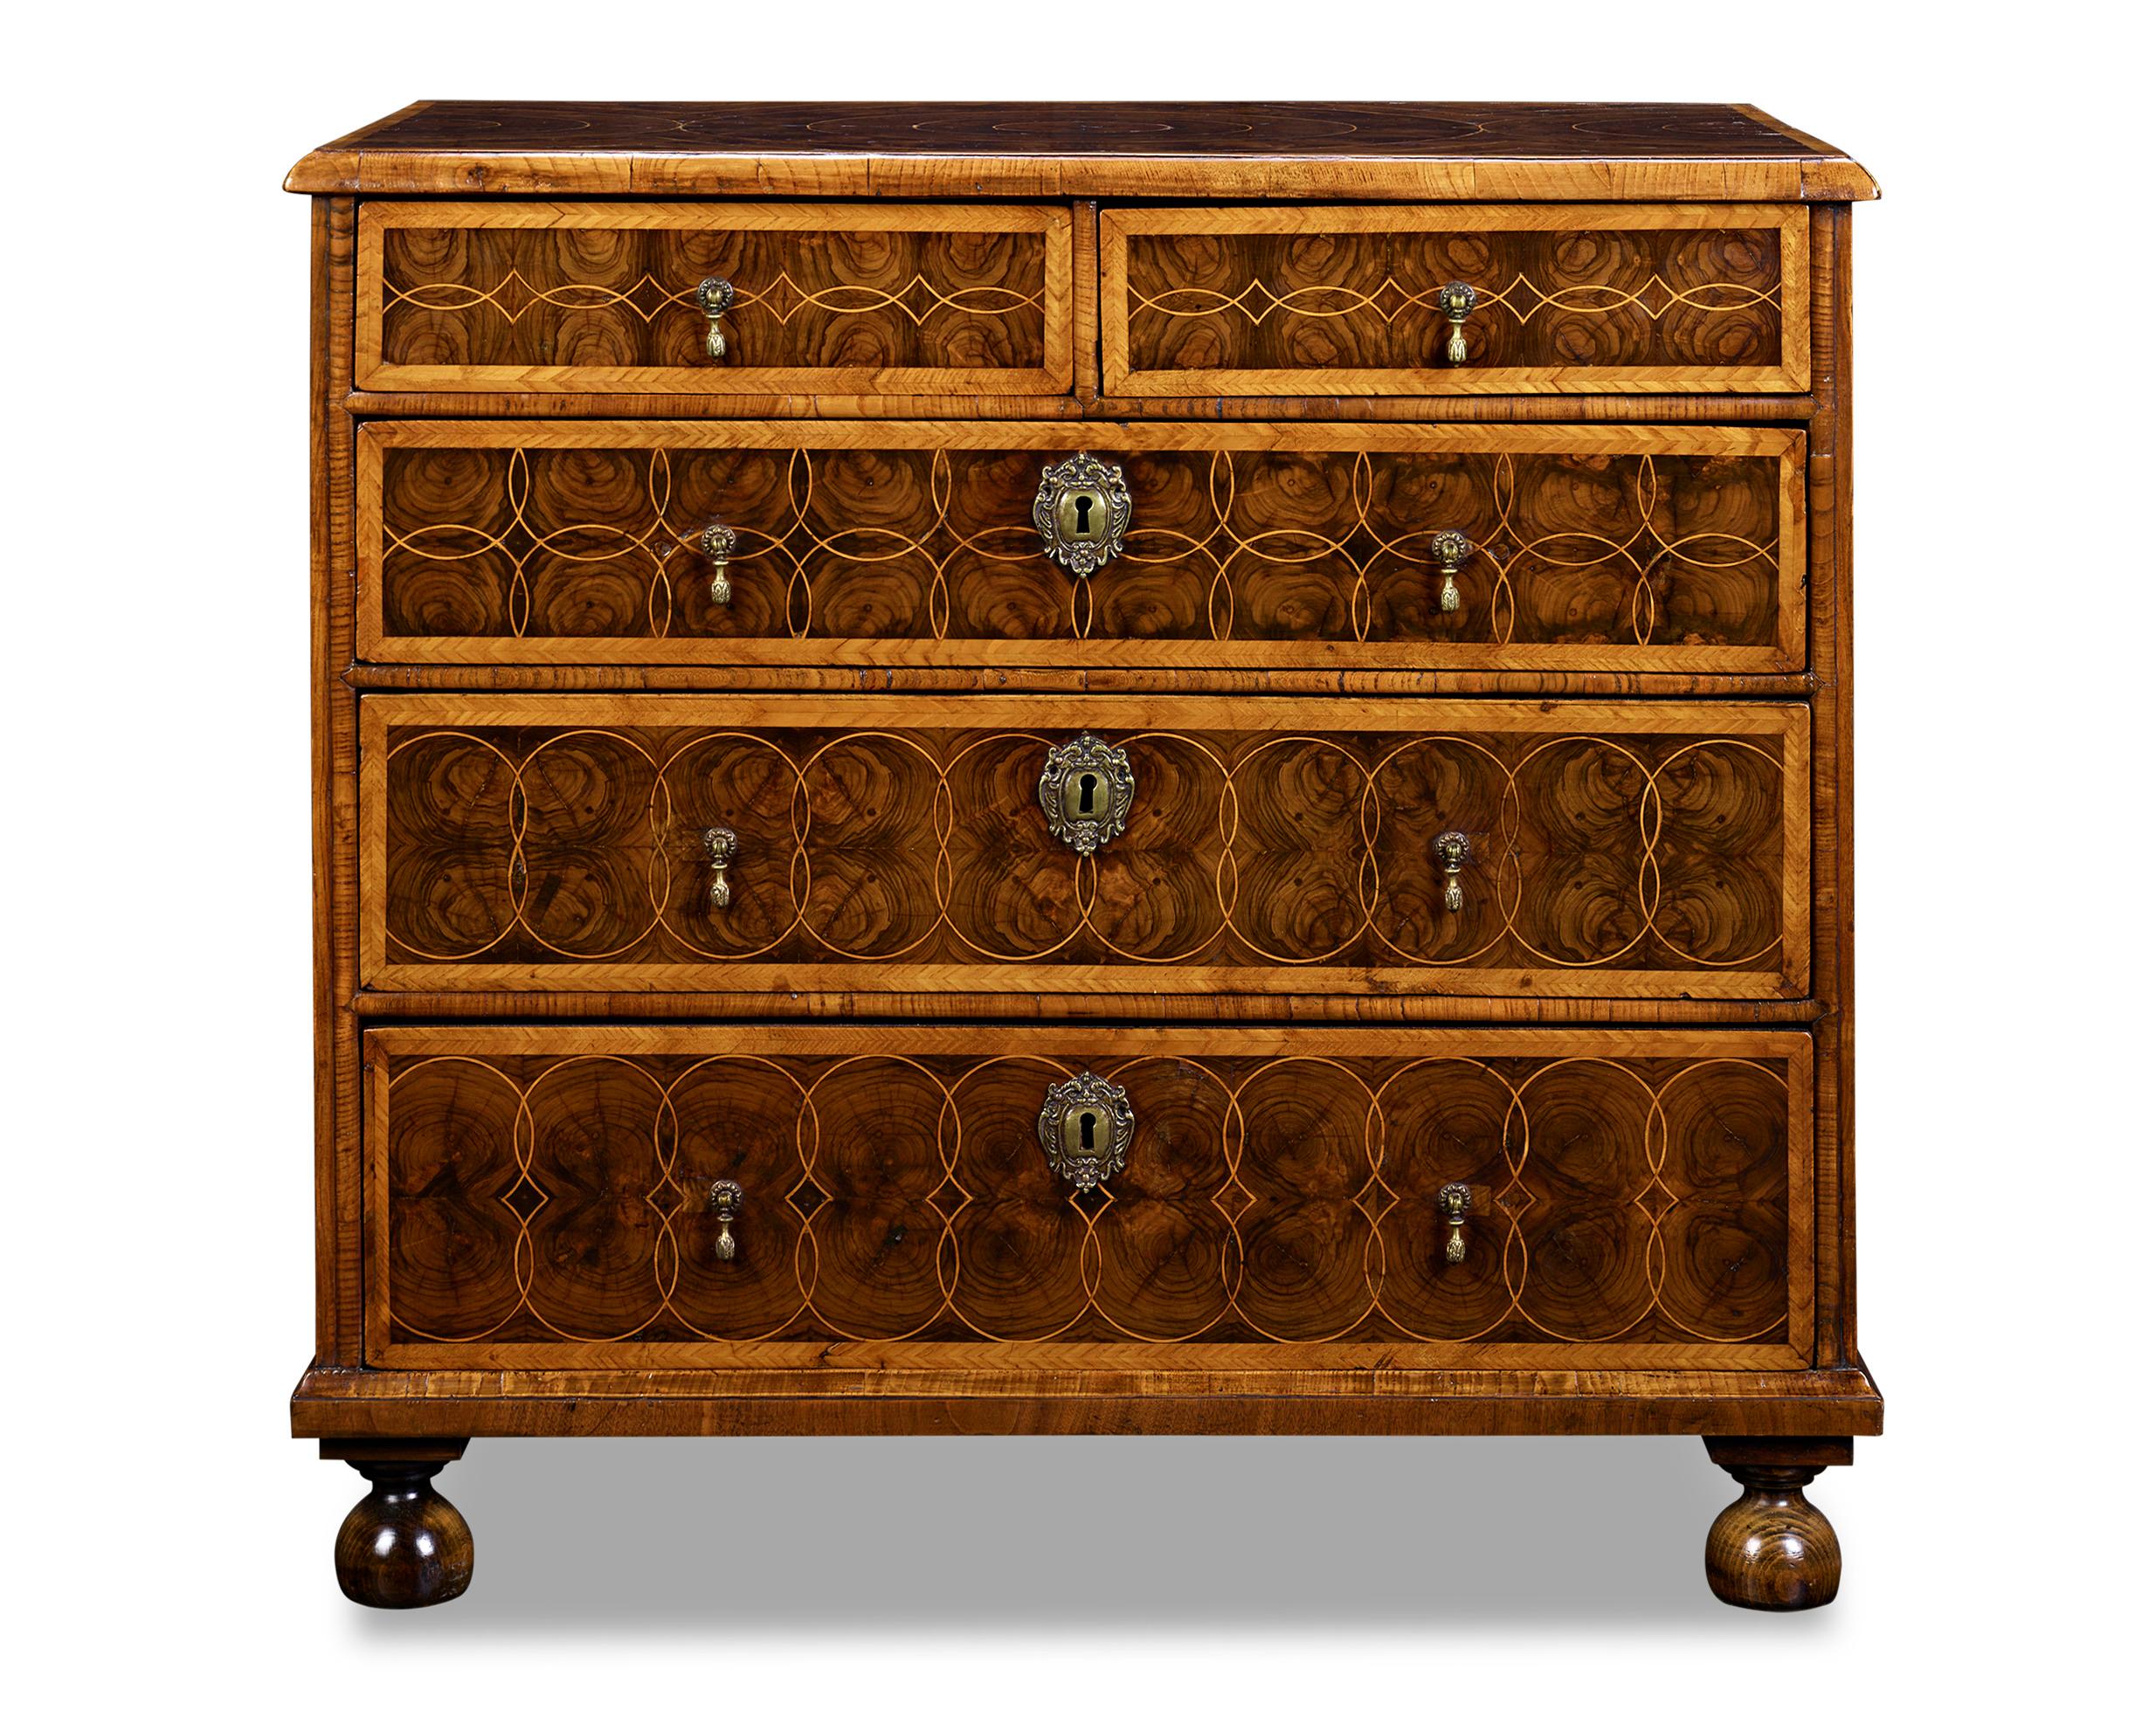 This William and Mary-period chest is distinguished by oyster veneering and circular inlay. Intersecting circles are inlaid into the veneers on the drawer fronts and on top of the chest, and the veneers have aged to a rich and warm patina. The